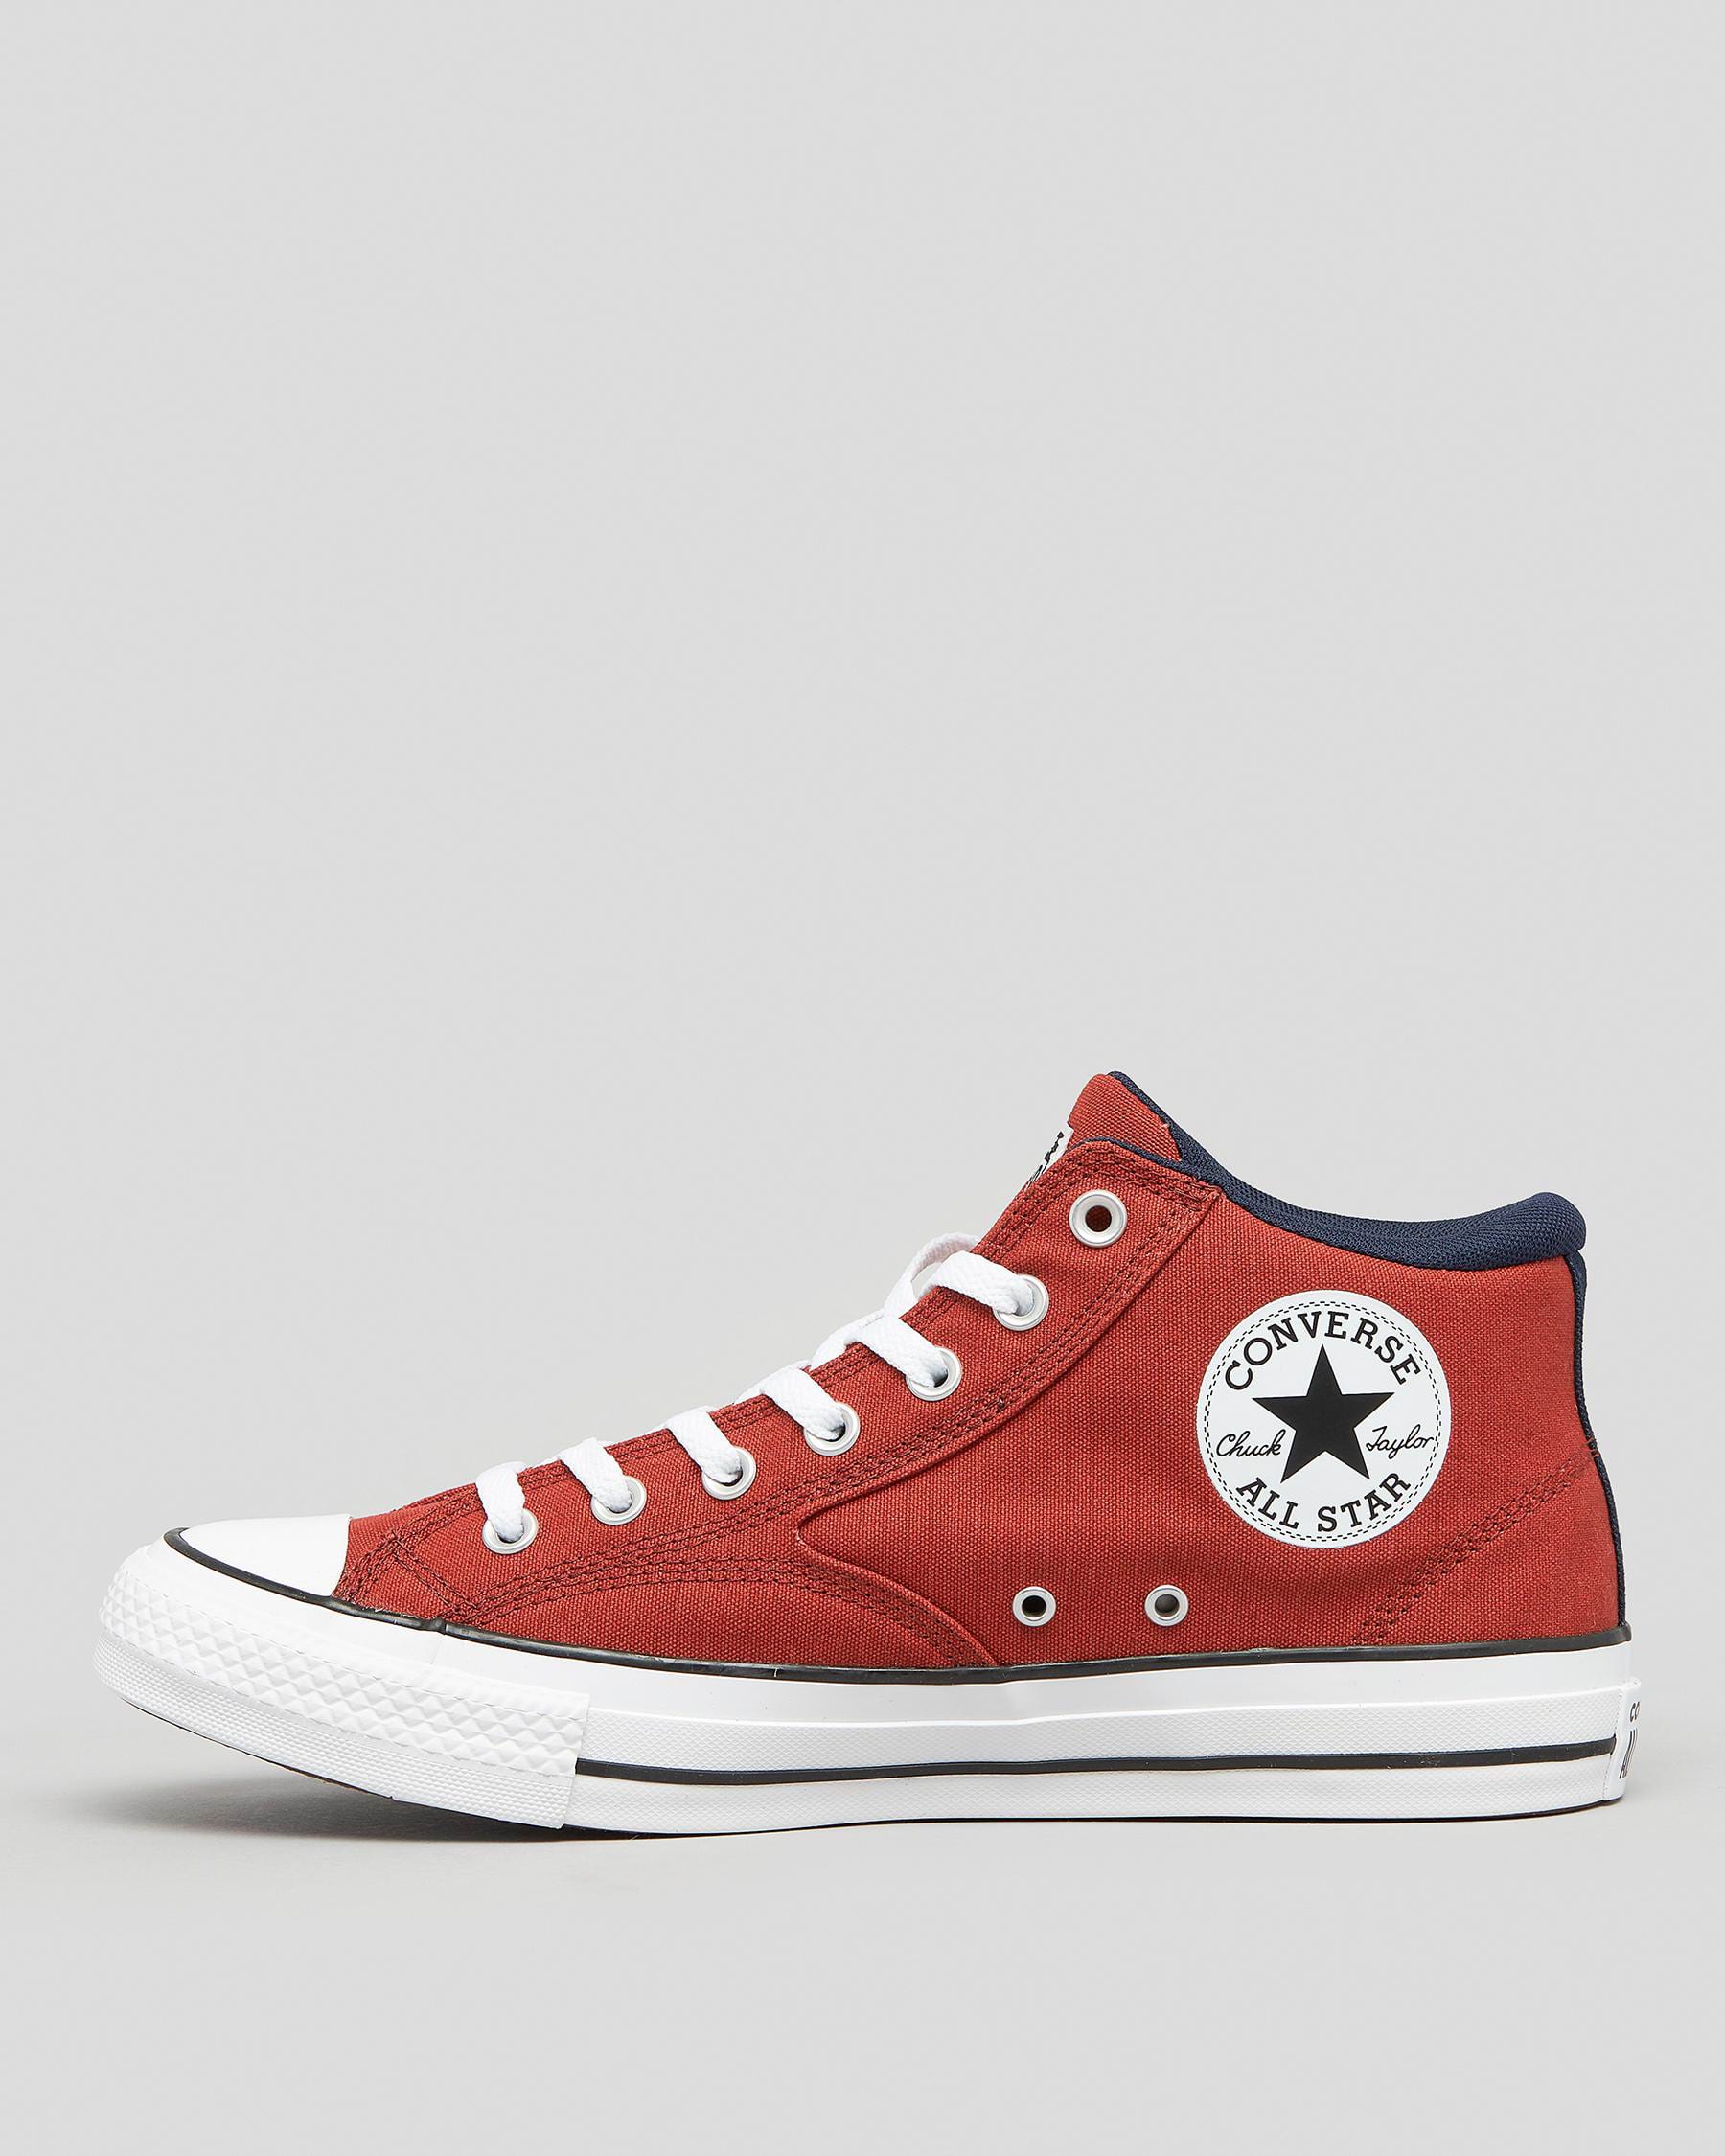 Shop Converse Chuck Taylor All Star Malden Street Mid Shoes In Rugged ...